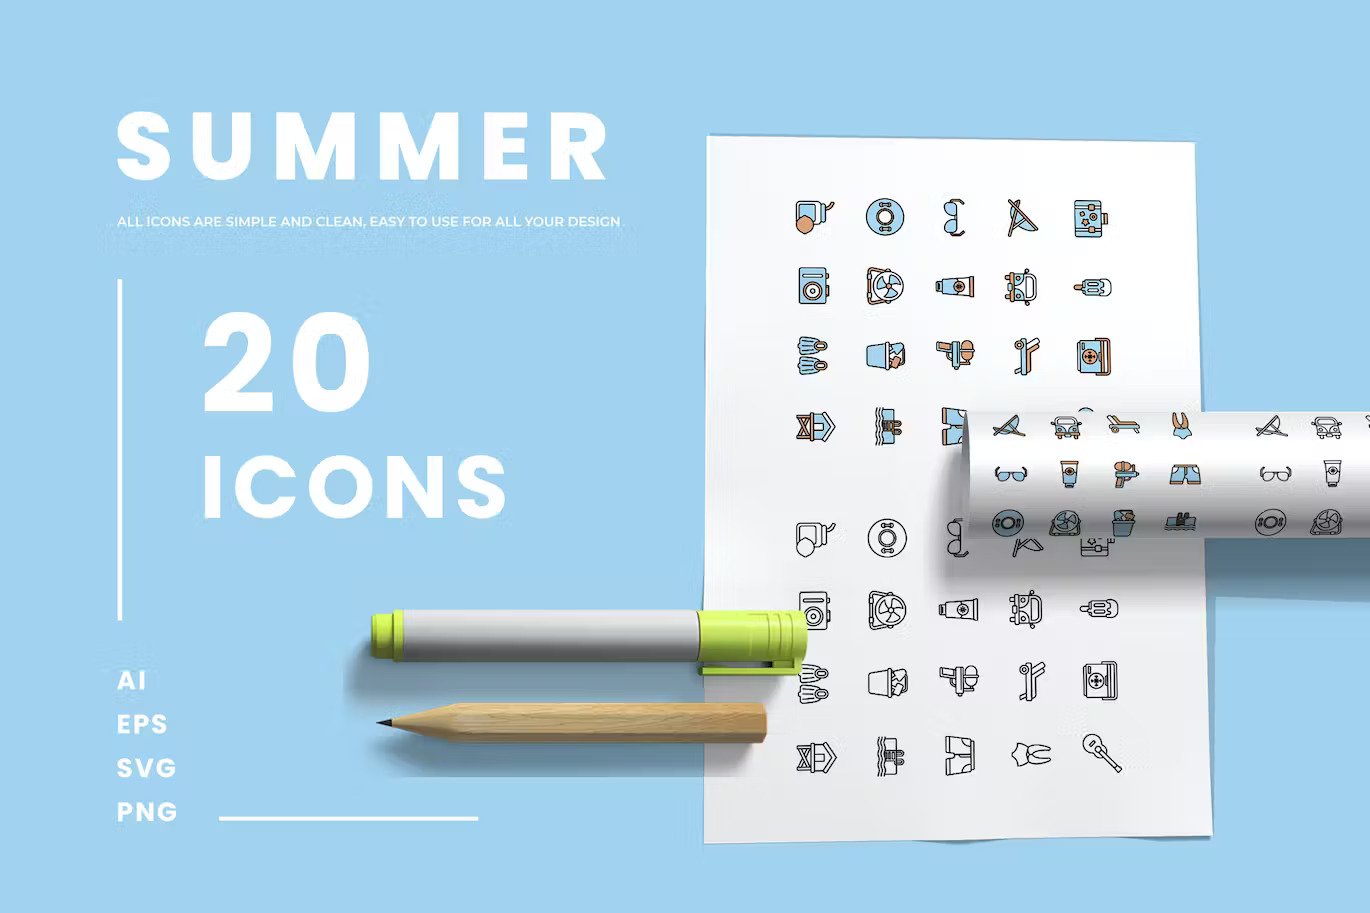 A summer icons in line in filled styles